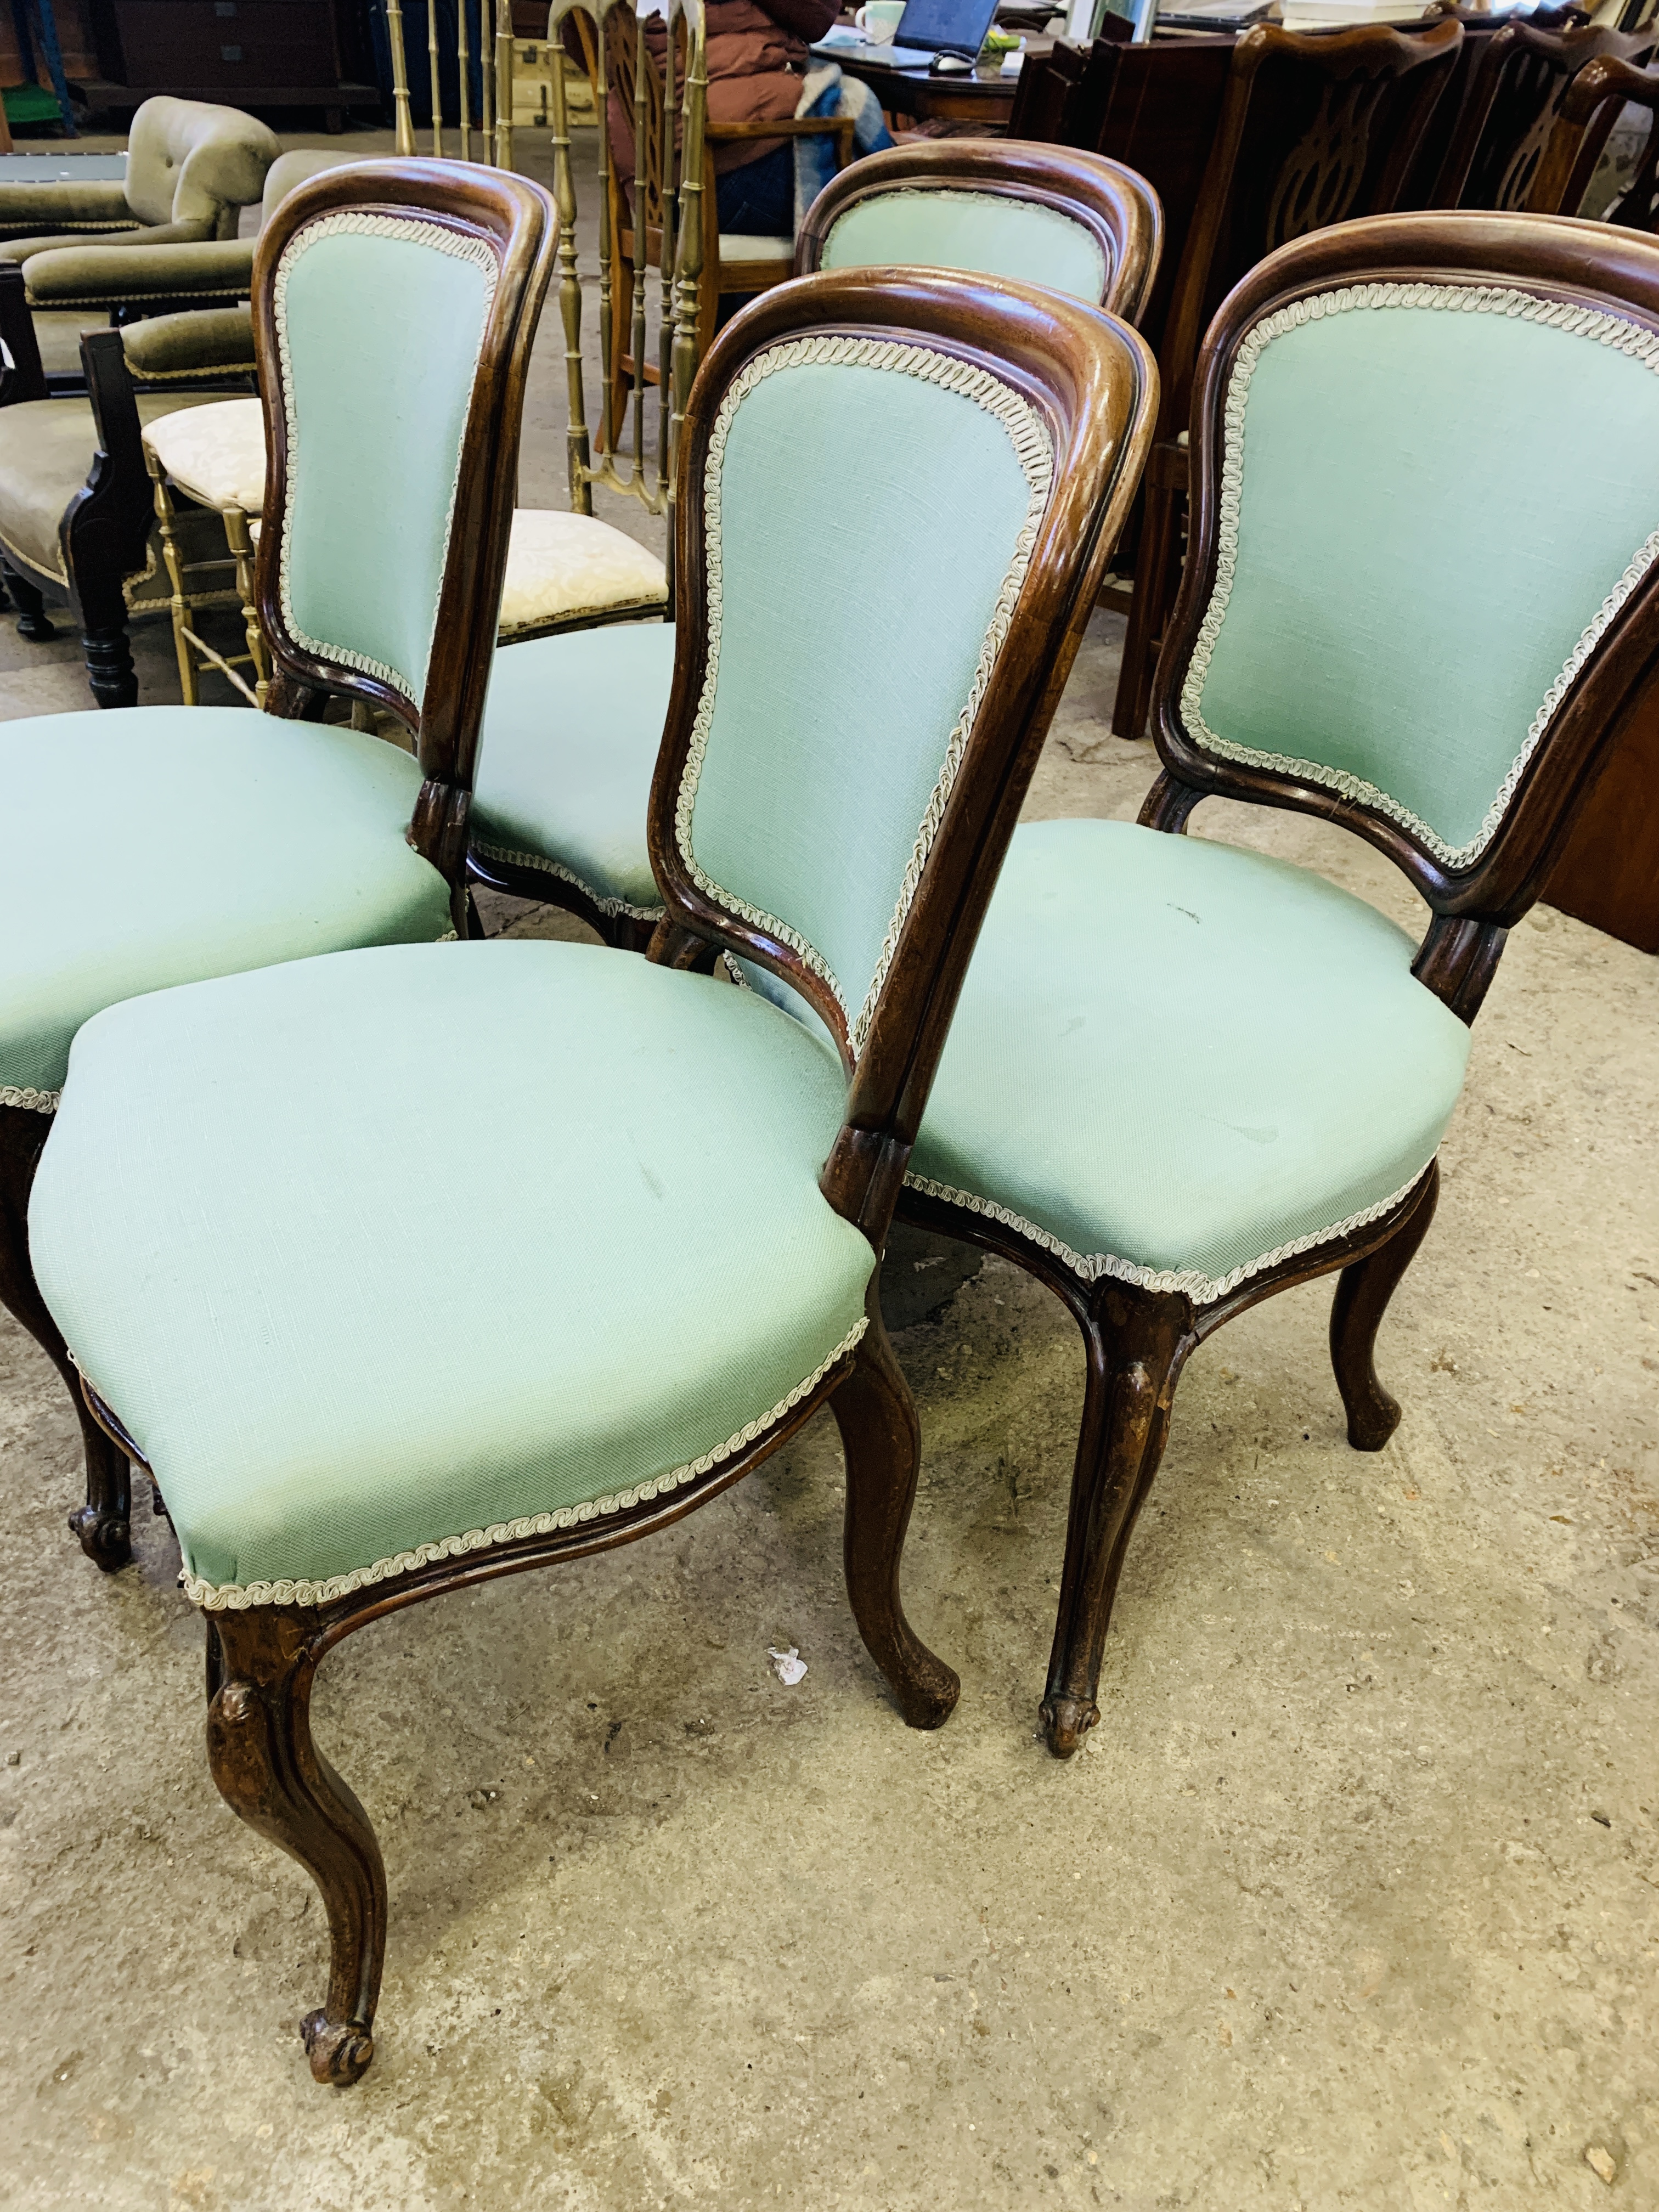 Four mahogany dining chairs - Image 3 of 4